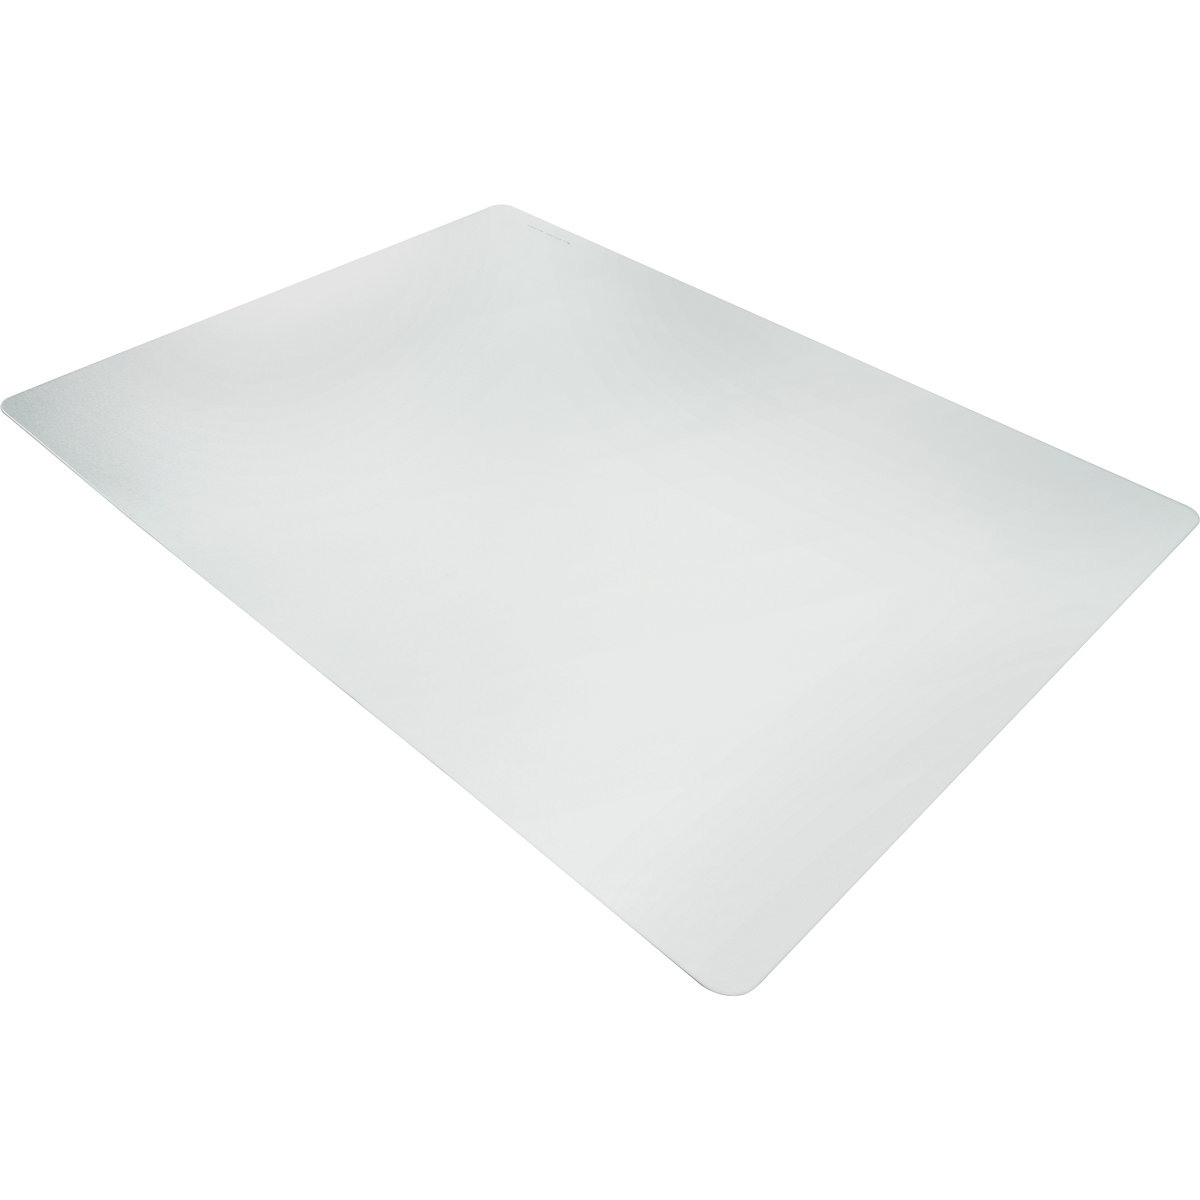 Floor protection mat DURAGRIP META, for smooth and hard floors, WxD 1500 x 1200 mm-5